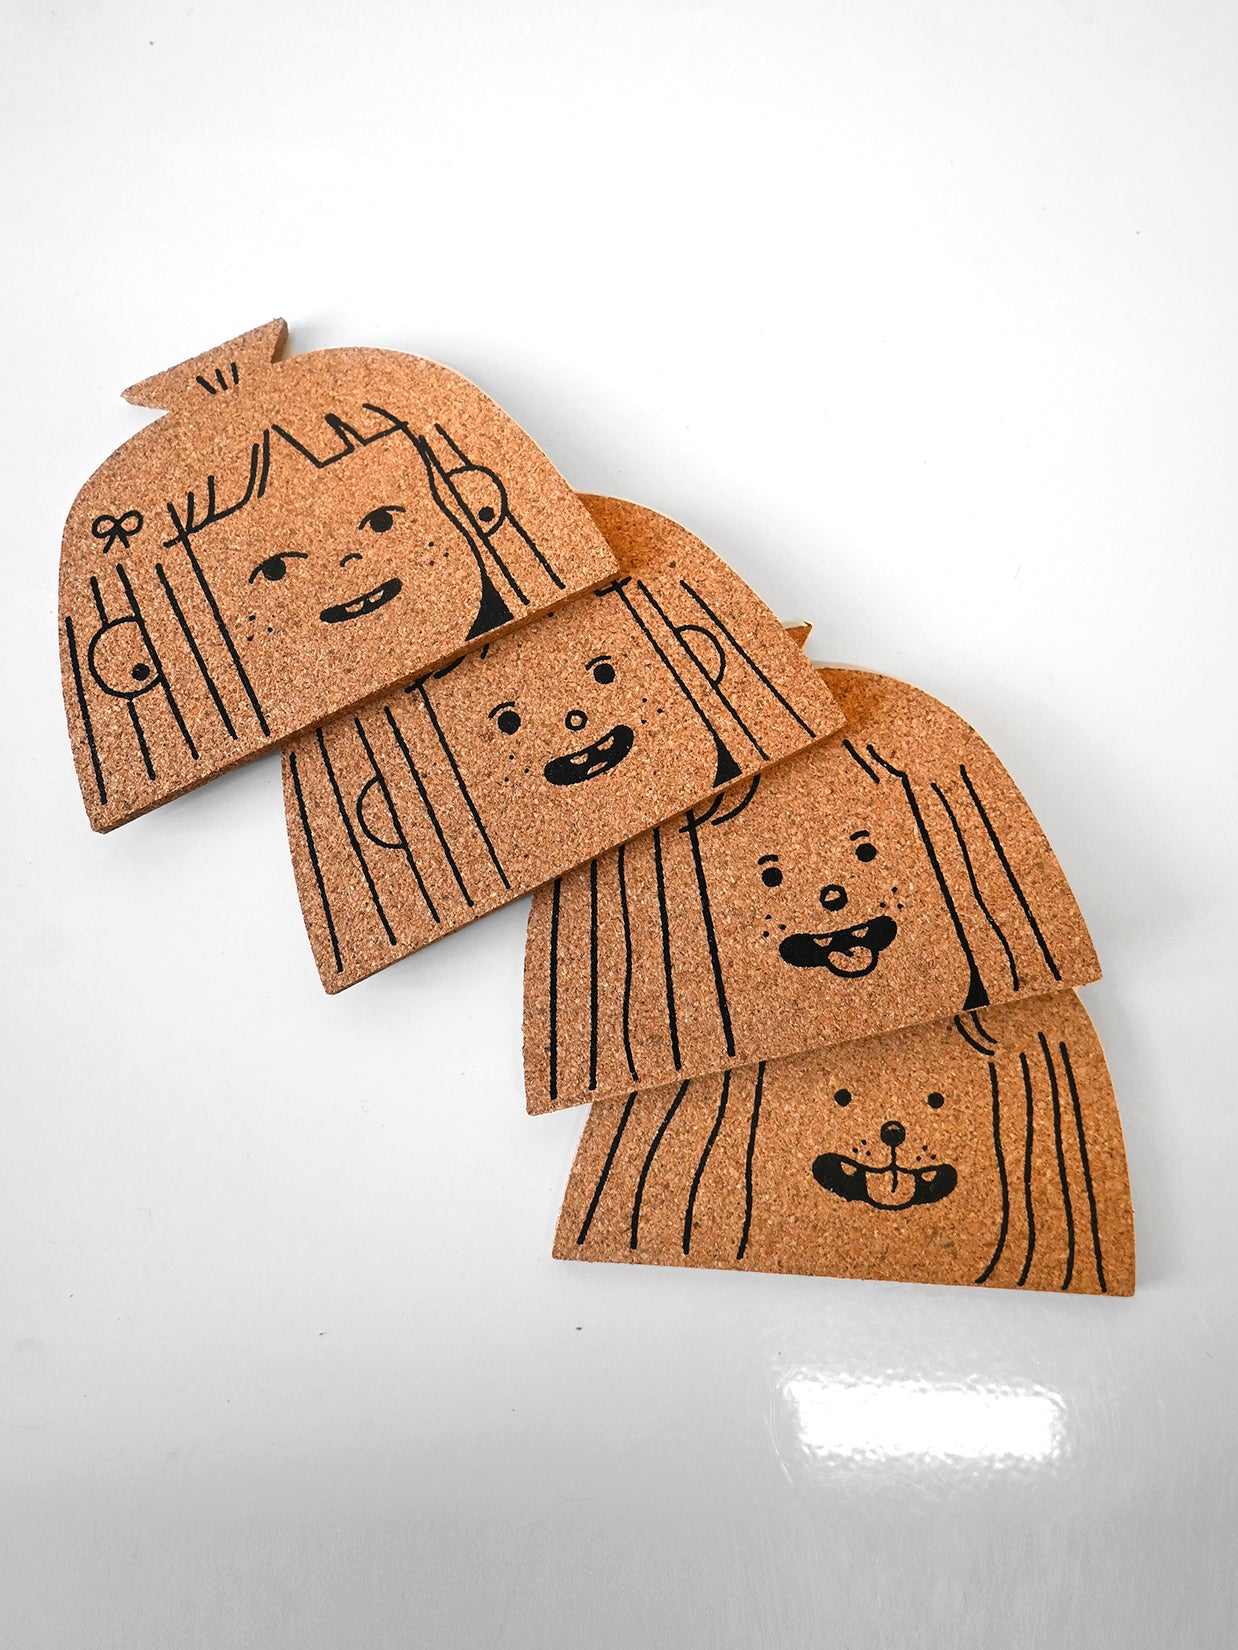 COMING SOON (PRE-ORDER) "Dog Person" Set of four cork coasters